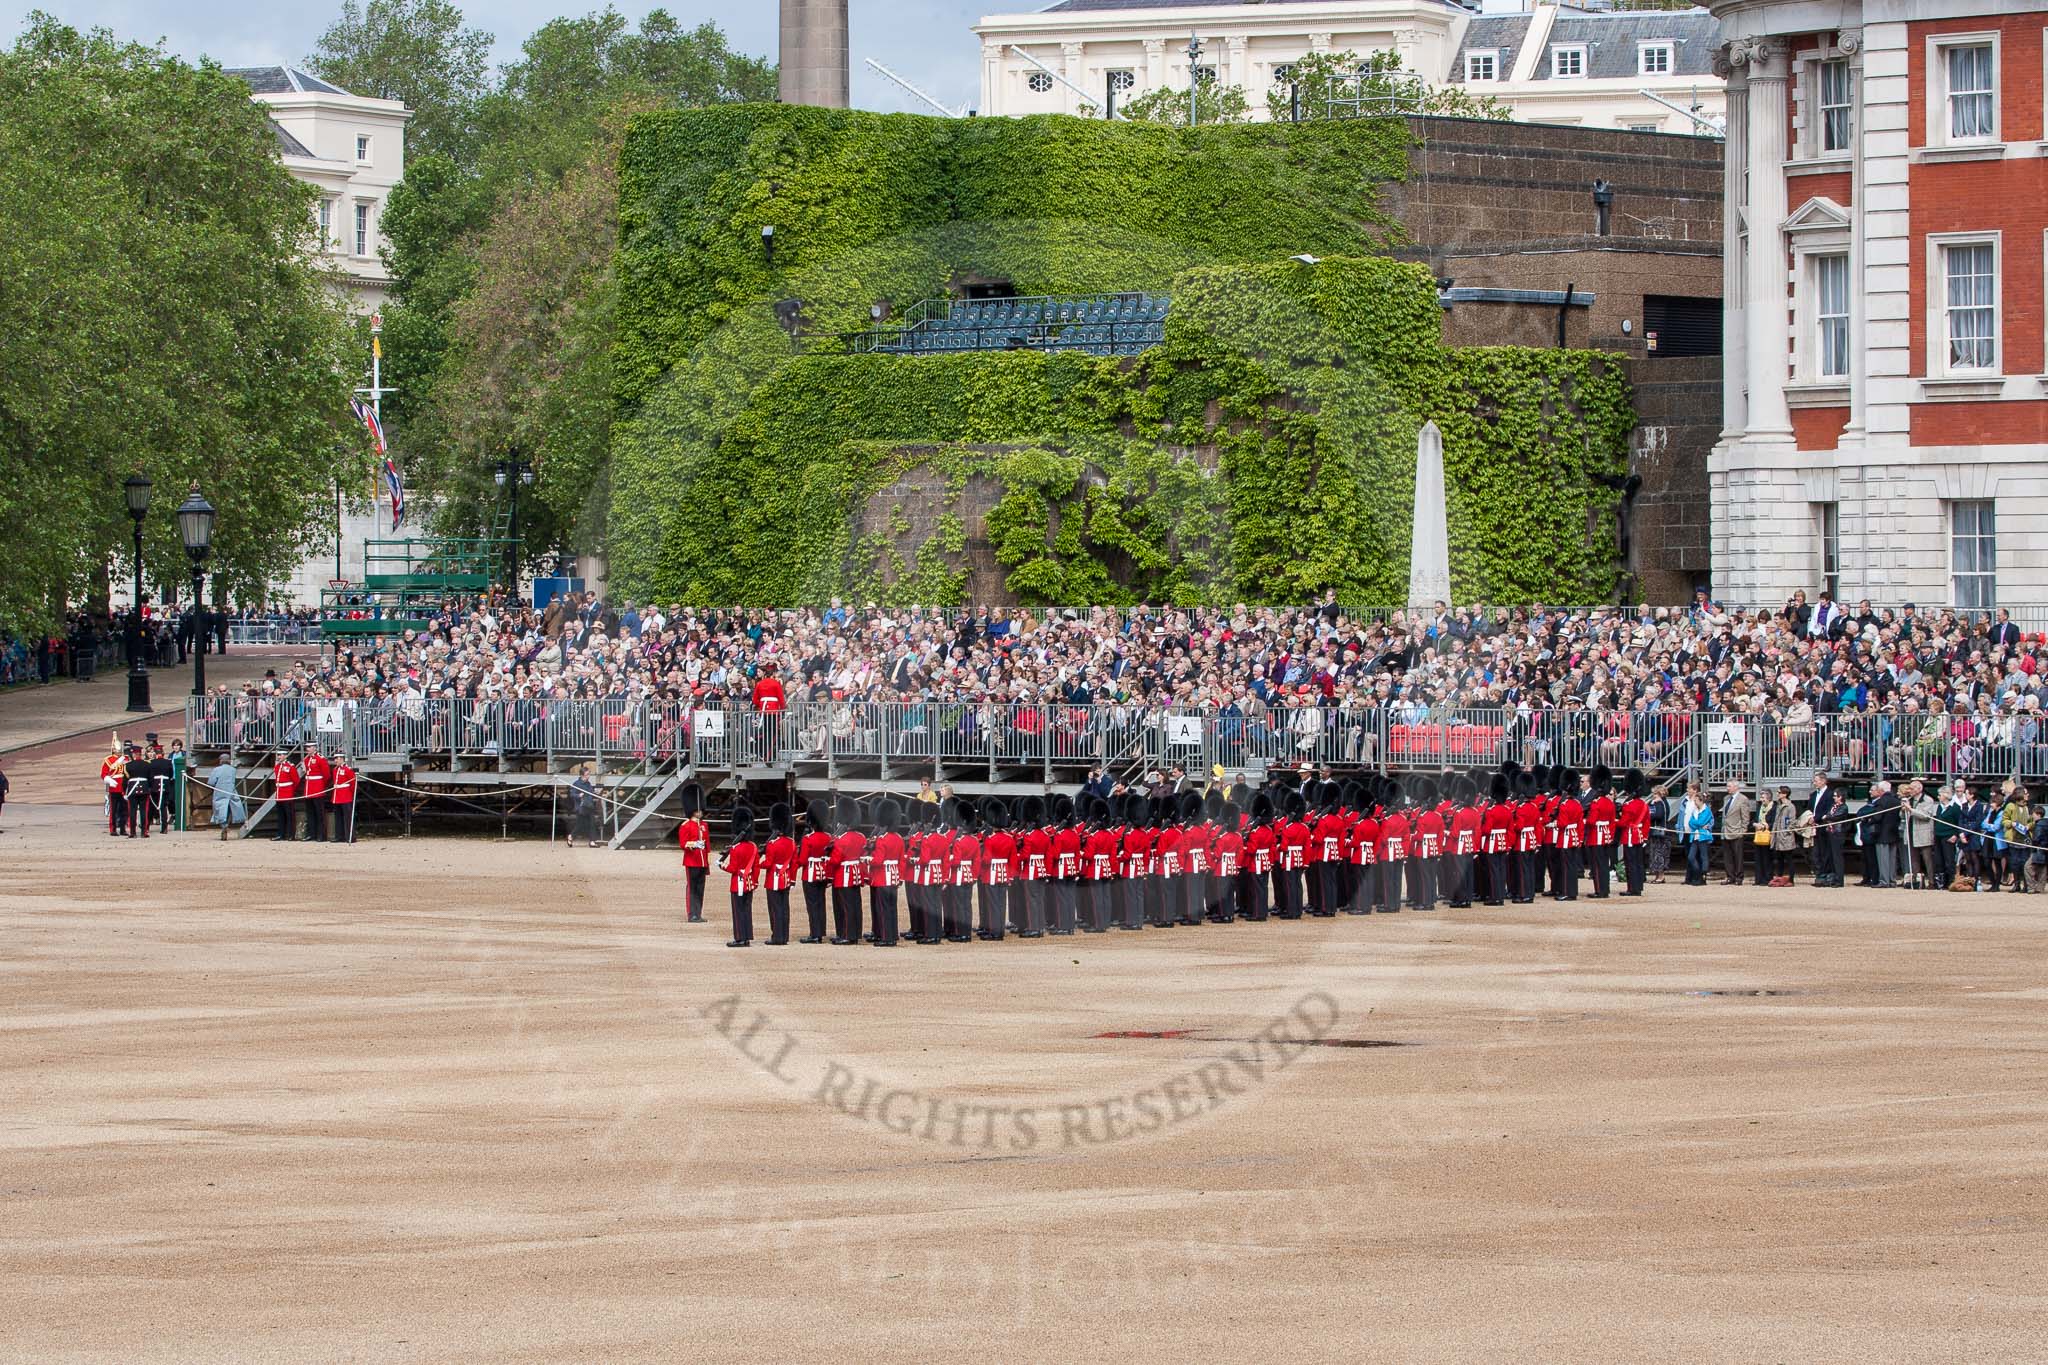 The Colonel's Review 2012: No. 6 Guard (F Company Scots Guards) taking their initial position at Horse Guards Parade..
Horse Guards Parade, Westminster,
London SW1,

United Kingdom,
on 09 June 2012 at 10:23, image #47